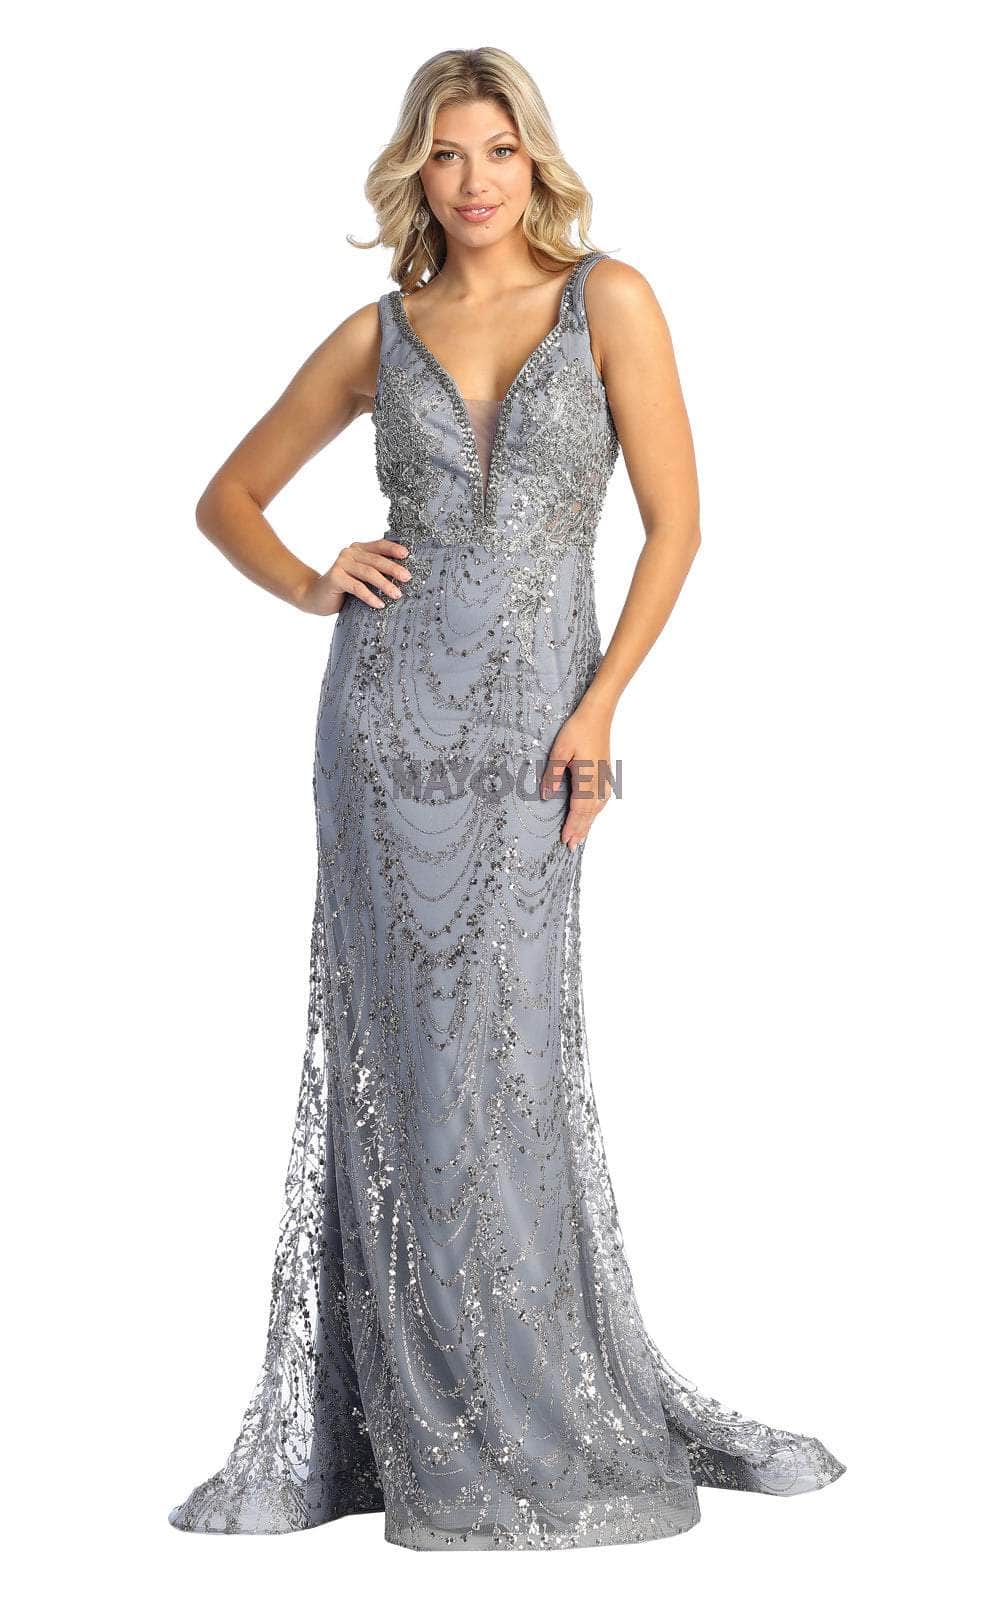 May Queen RQ7939 - Illusion Bead Embellished Sheath Dress Special Occasion Dress